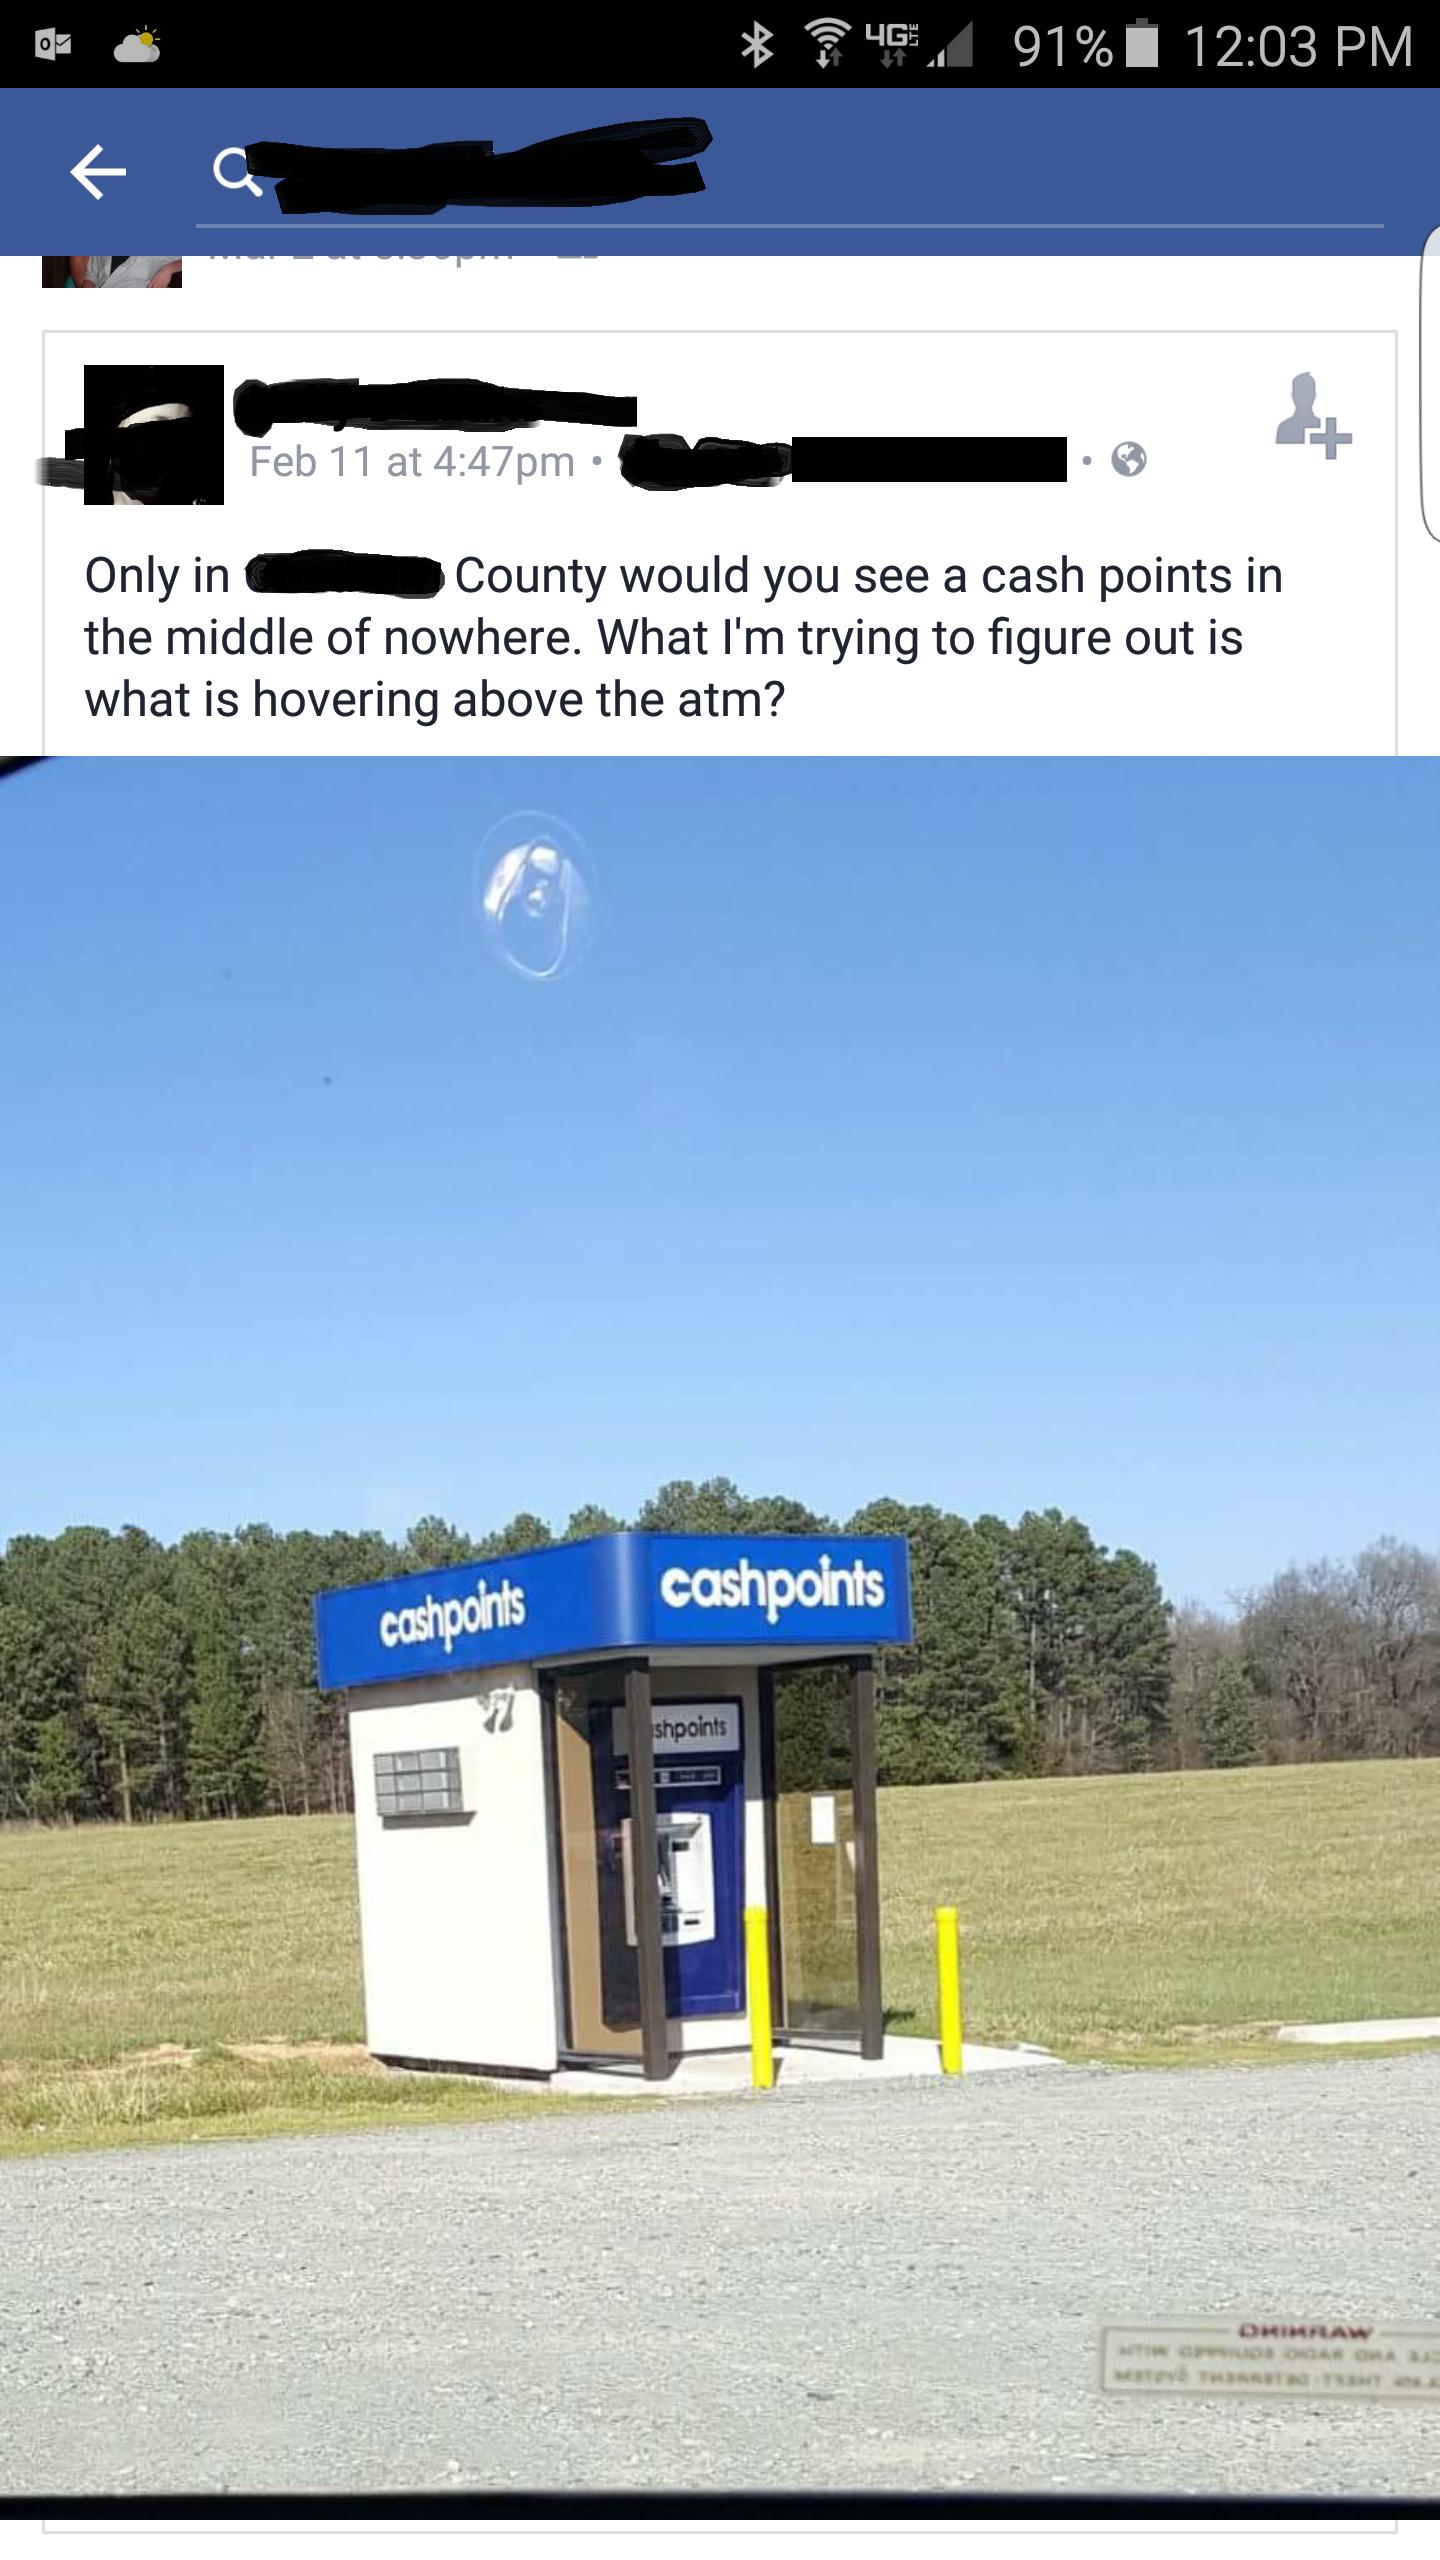 What's that hovering above the ATM?